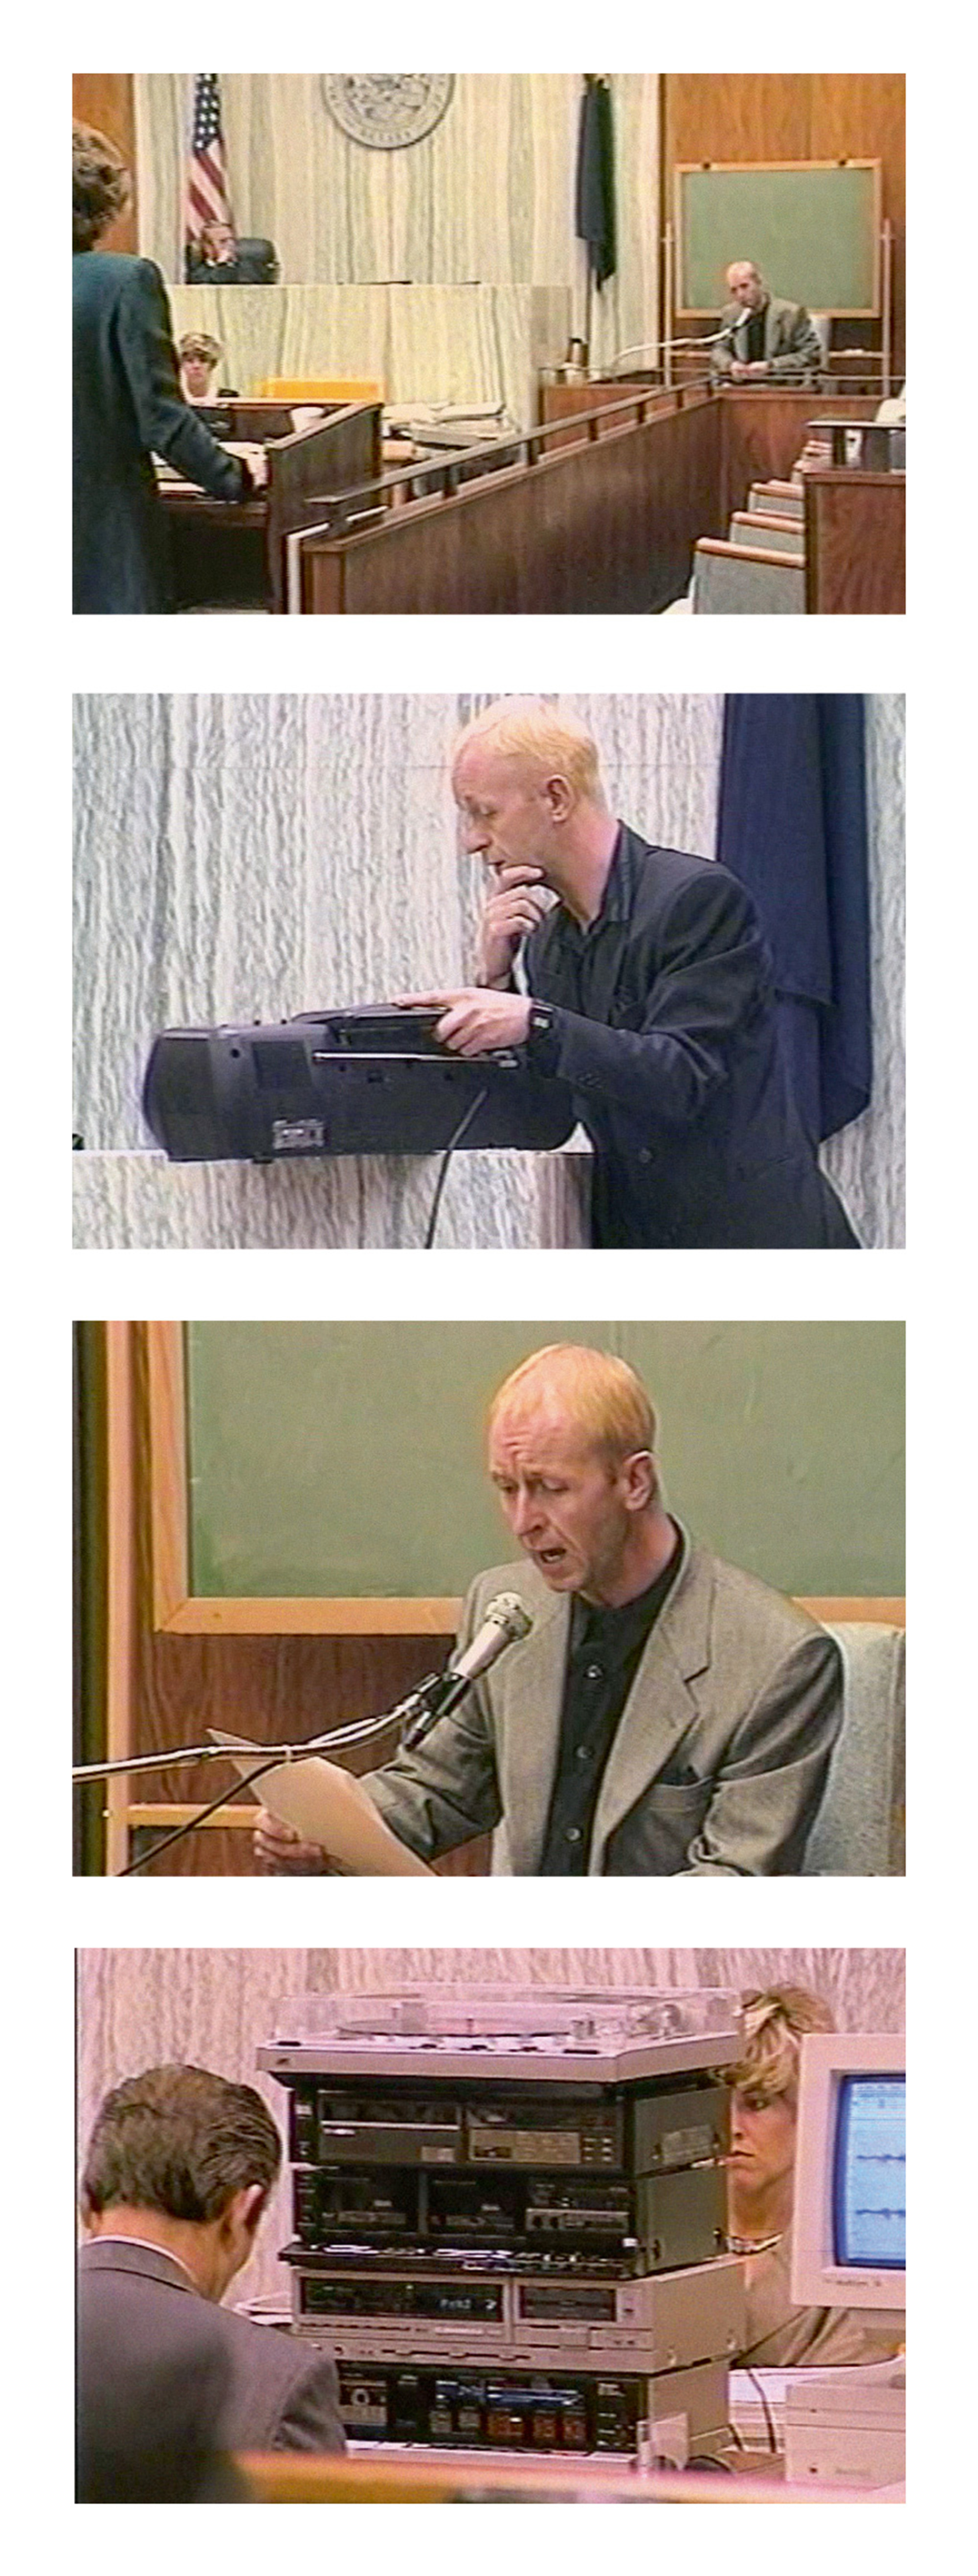 All images from David van Taylor’s 1992 documentary film Dream Deceivers: The Story Behind James Vance vs. Judas Priest. Here, the band’s lead singer Rob Halford performs in the dock.